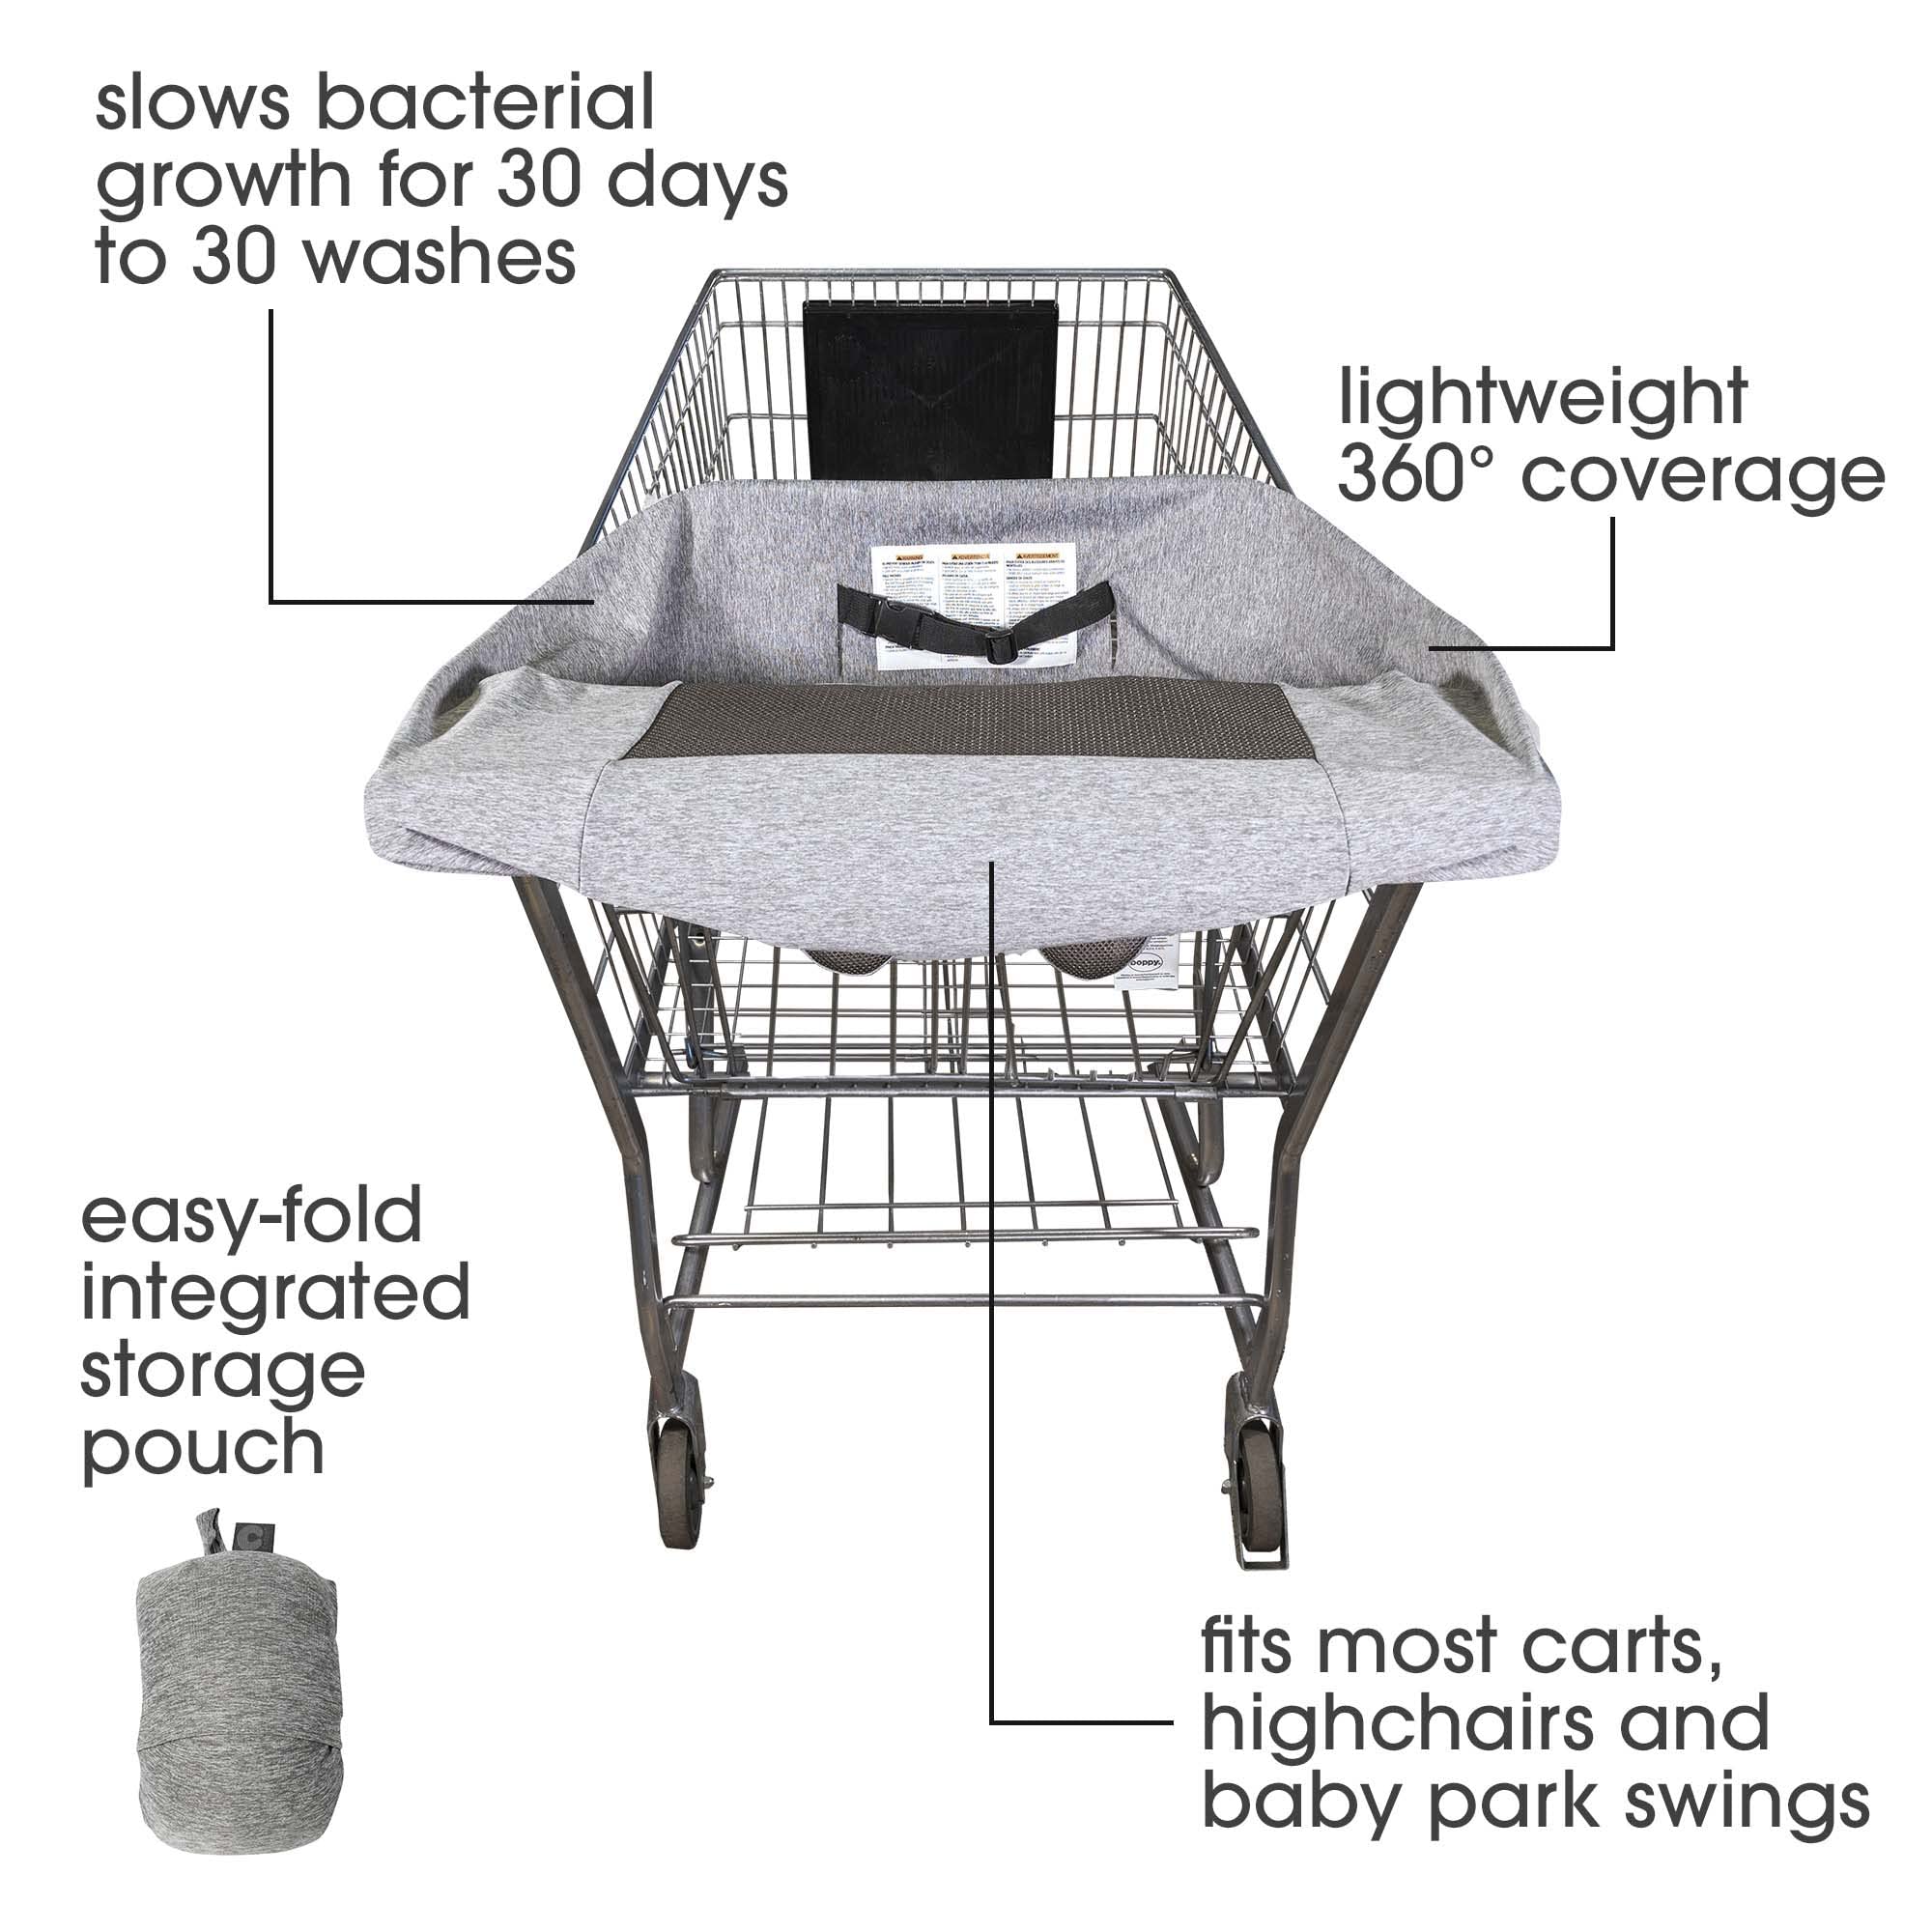 Boppy Compact Shopping Cart Cover, Antibacterial Treated, Gray Heathered with Storage Pouch, Easy-on Stretch Fabric for Single and Wide Shopping Carts, Highchairs and Playground Swings, 6-48 Months